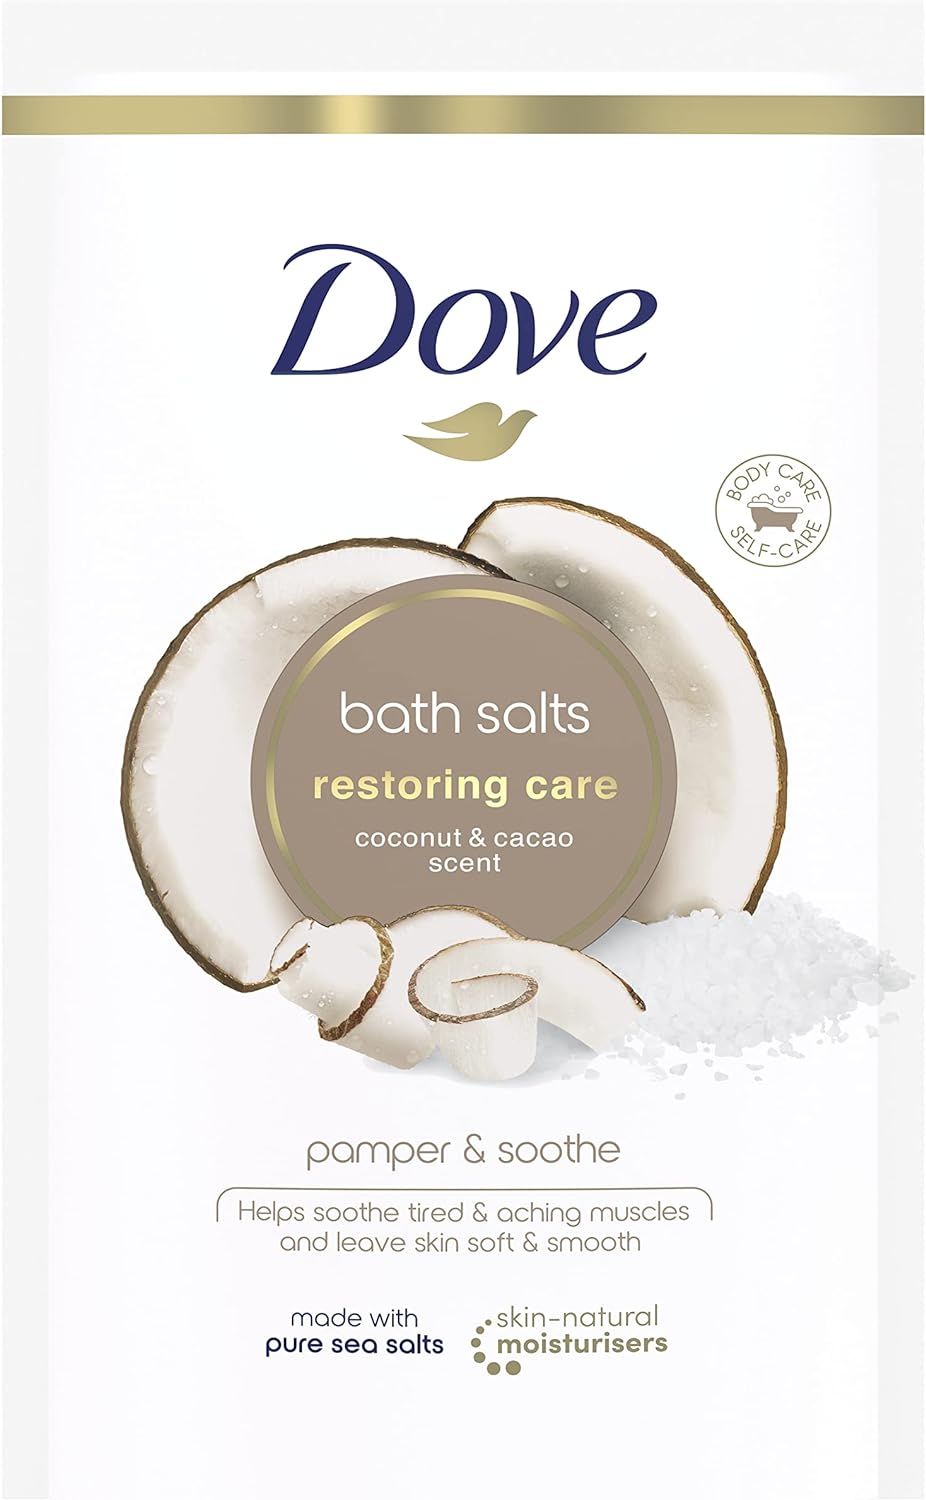 Dove Coconut and Cacao Restoring Care Bath Salts with Skin-Natural Moisturizers